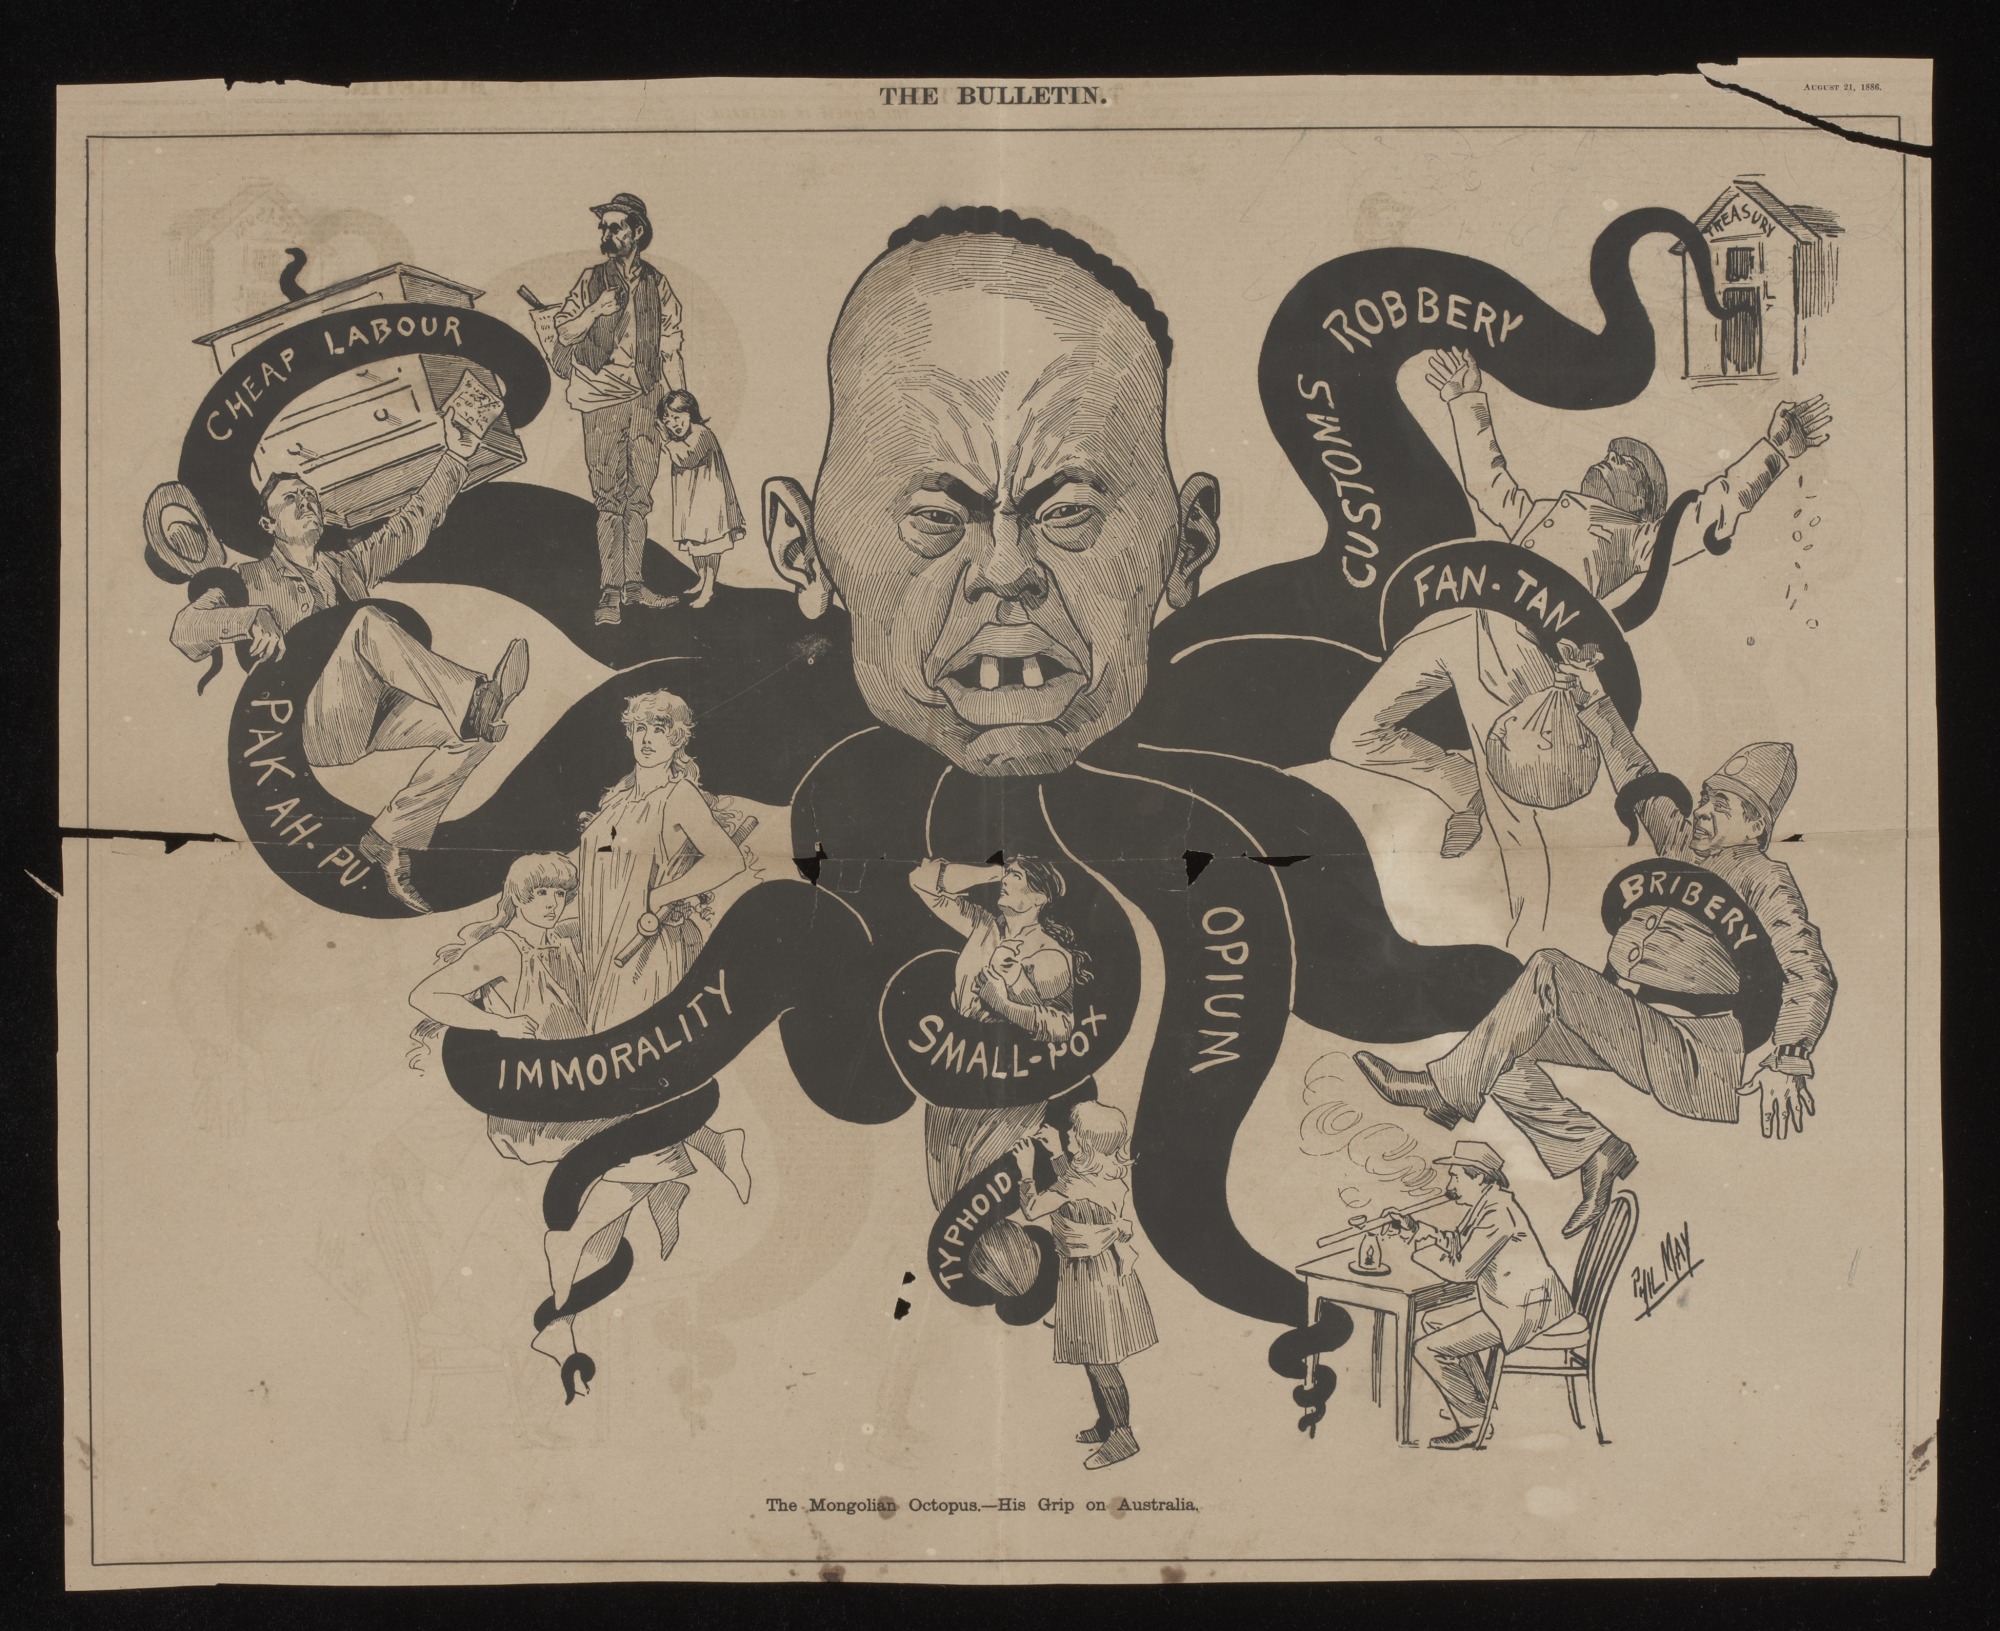 An anti-Chinese cartoon titled ‘The Mongolian Octopus’, published in the <i>Bulletin</i> in 1886